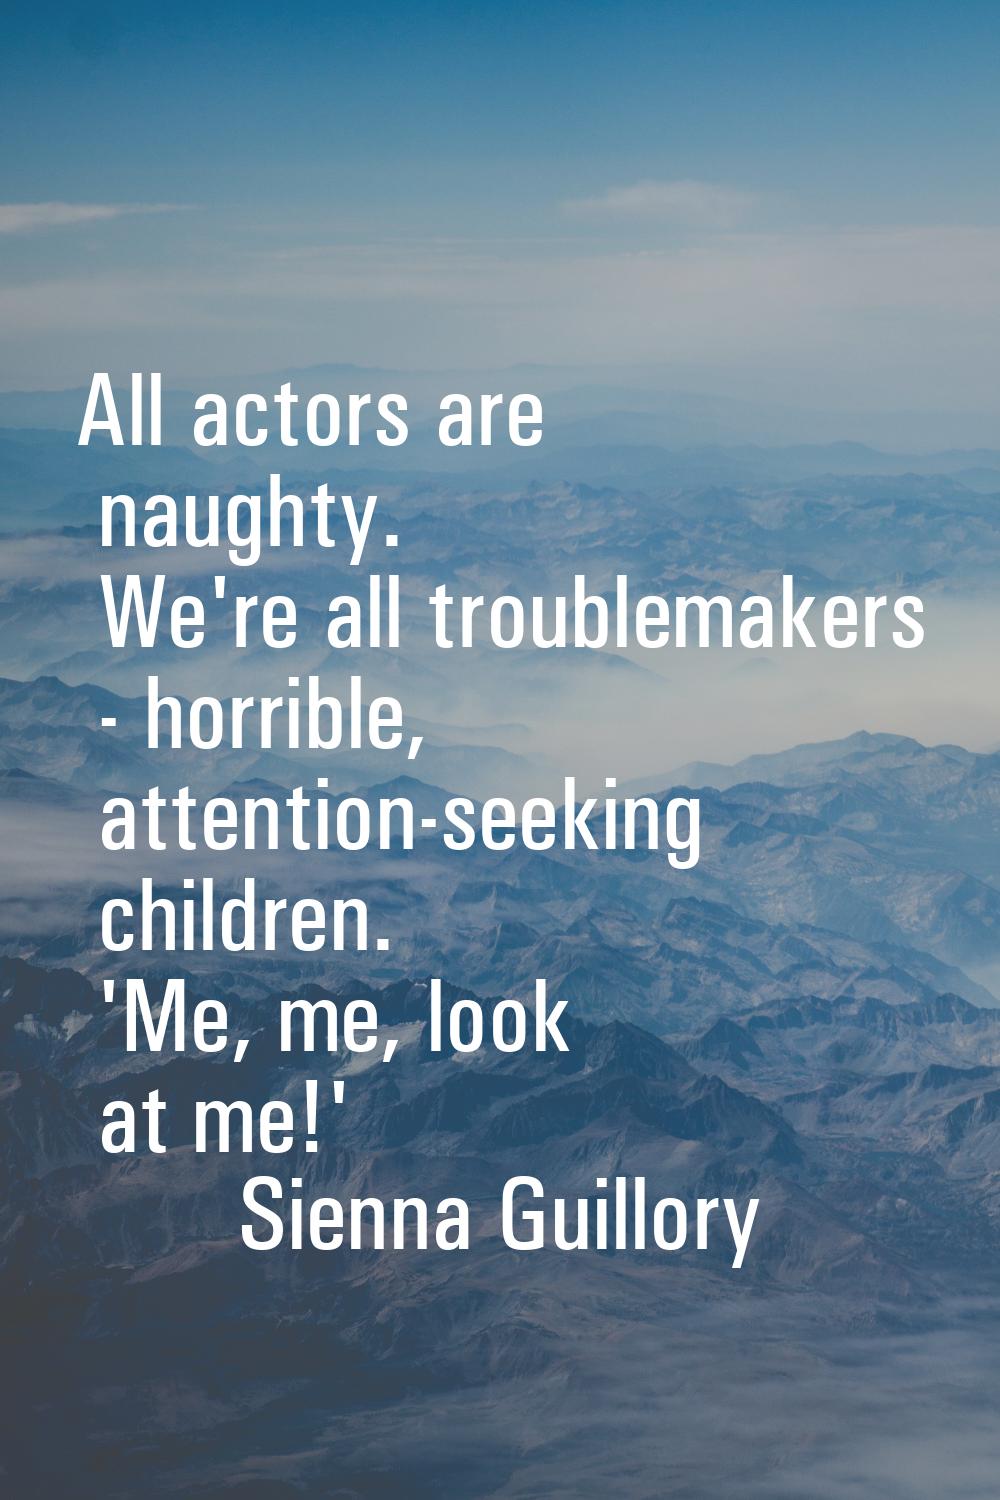 All actors are naughty. We're all troublemakers - horrible, attention-seeking children. 'Me, me, lo